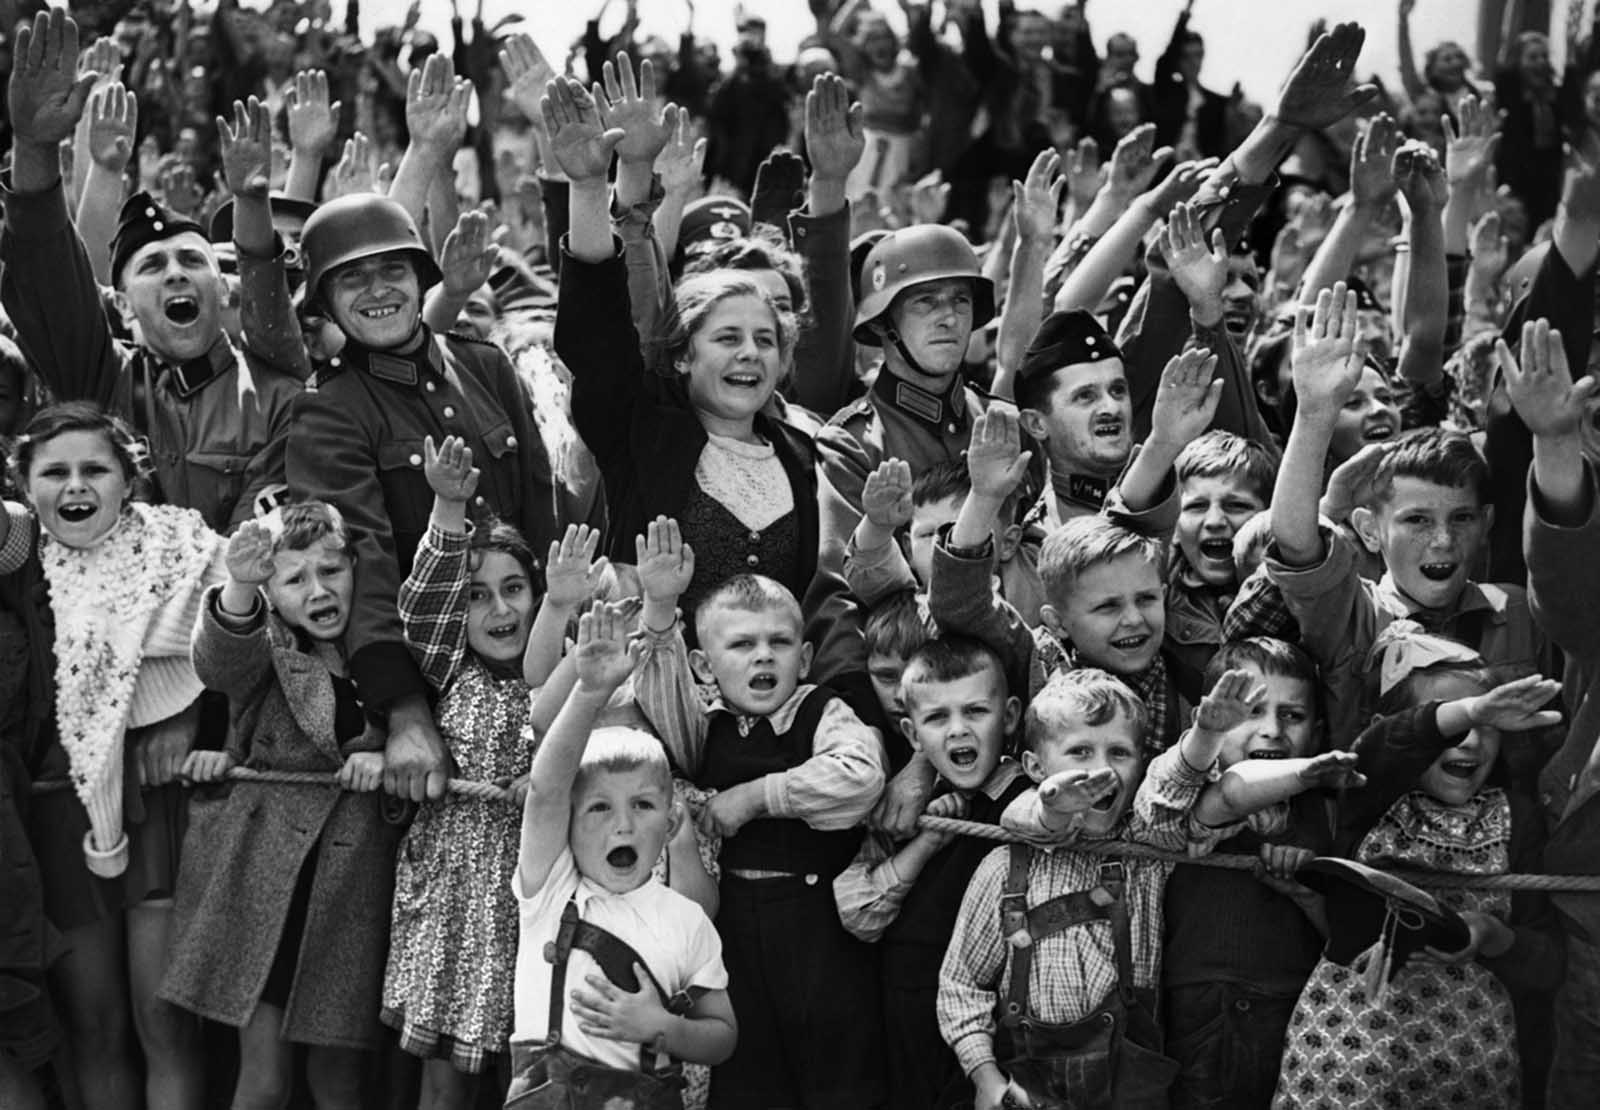 A crowd of women, children and soldiers of the German Wehrmacht give the Nazi salute on June 19, 1940, at an unknown location in Germany.